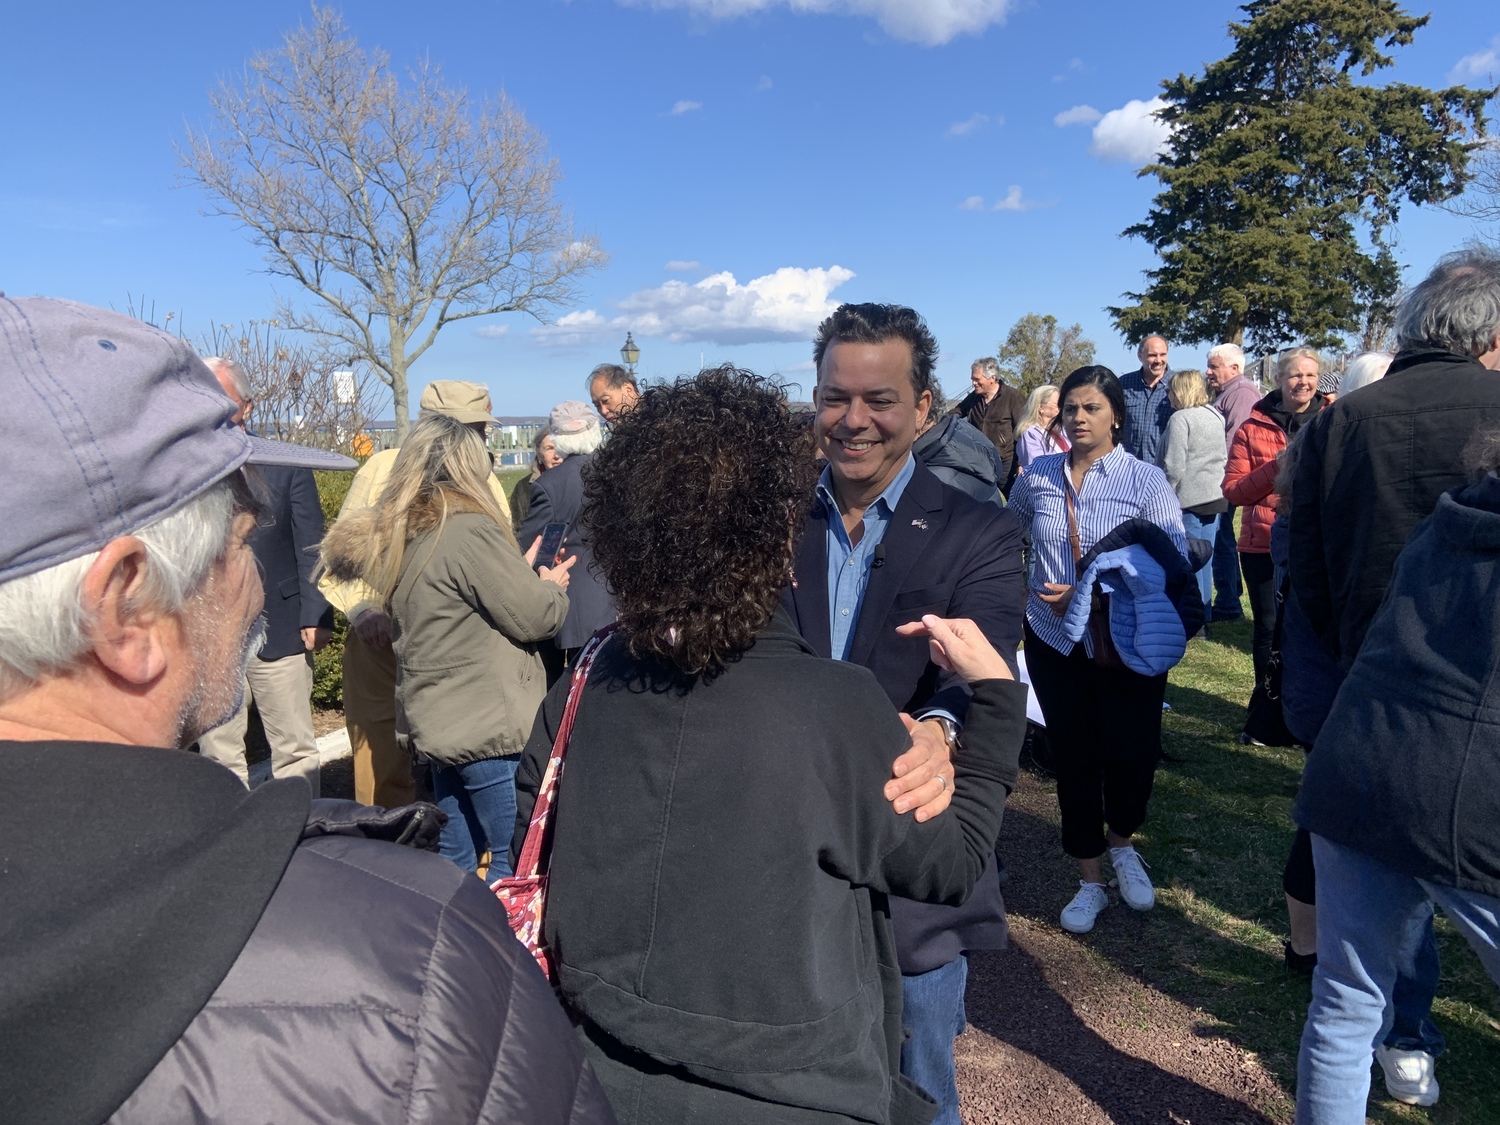 Democratic congressional candidate John Avlon greets well wishers after kicking off his campaign in Sag Harbor on Saturday. STEPHEN J. KOTZ